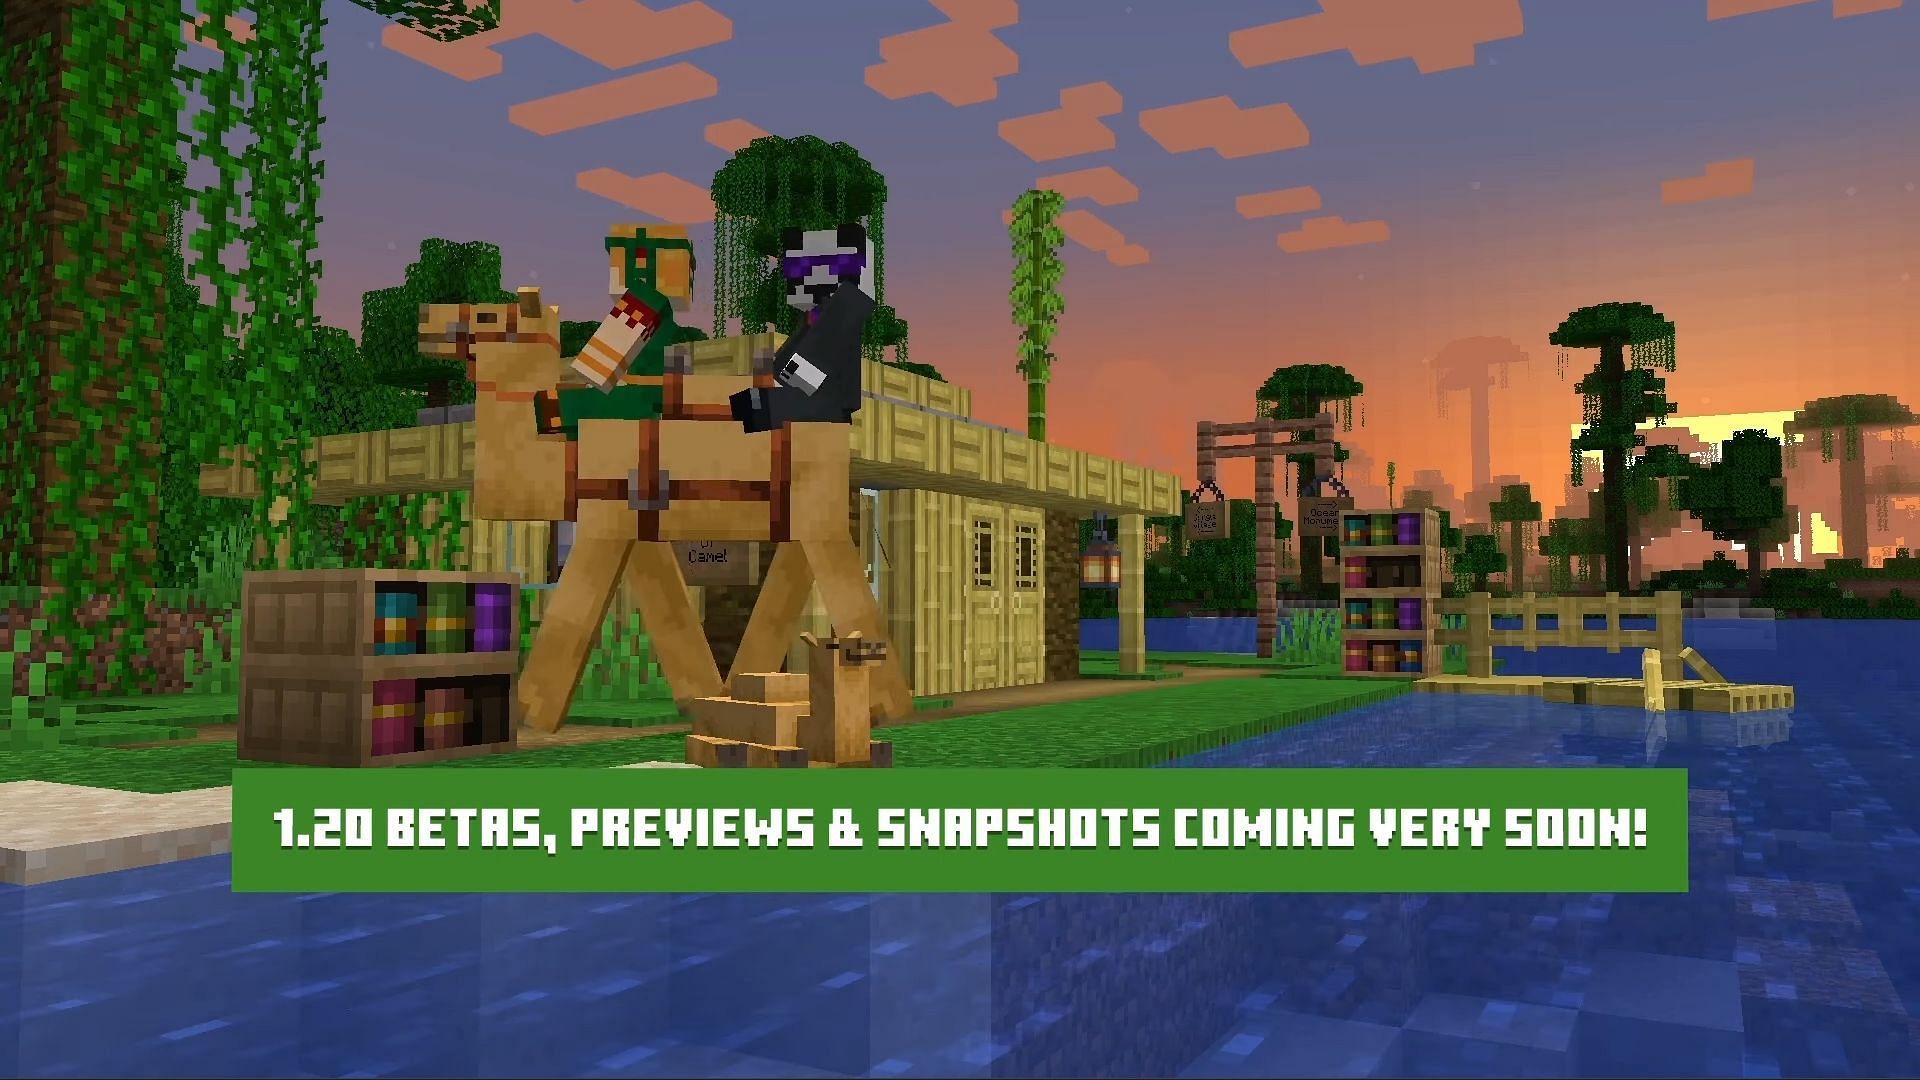 Players will be able to explore new features in a few days, more will be revealed as Mojang works on them (Image via YouTube/Minecraft)